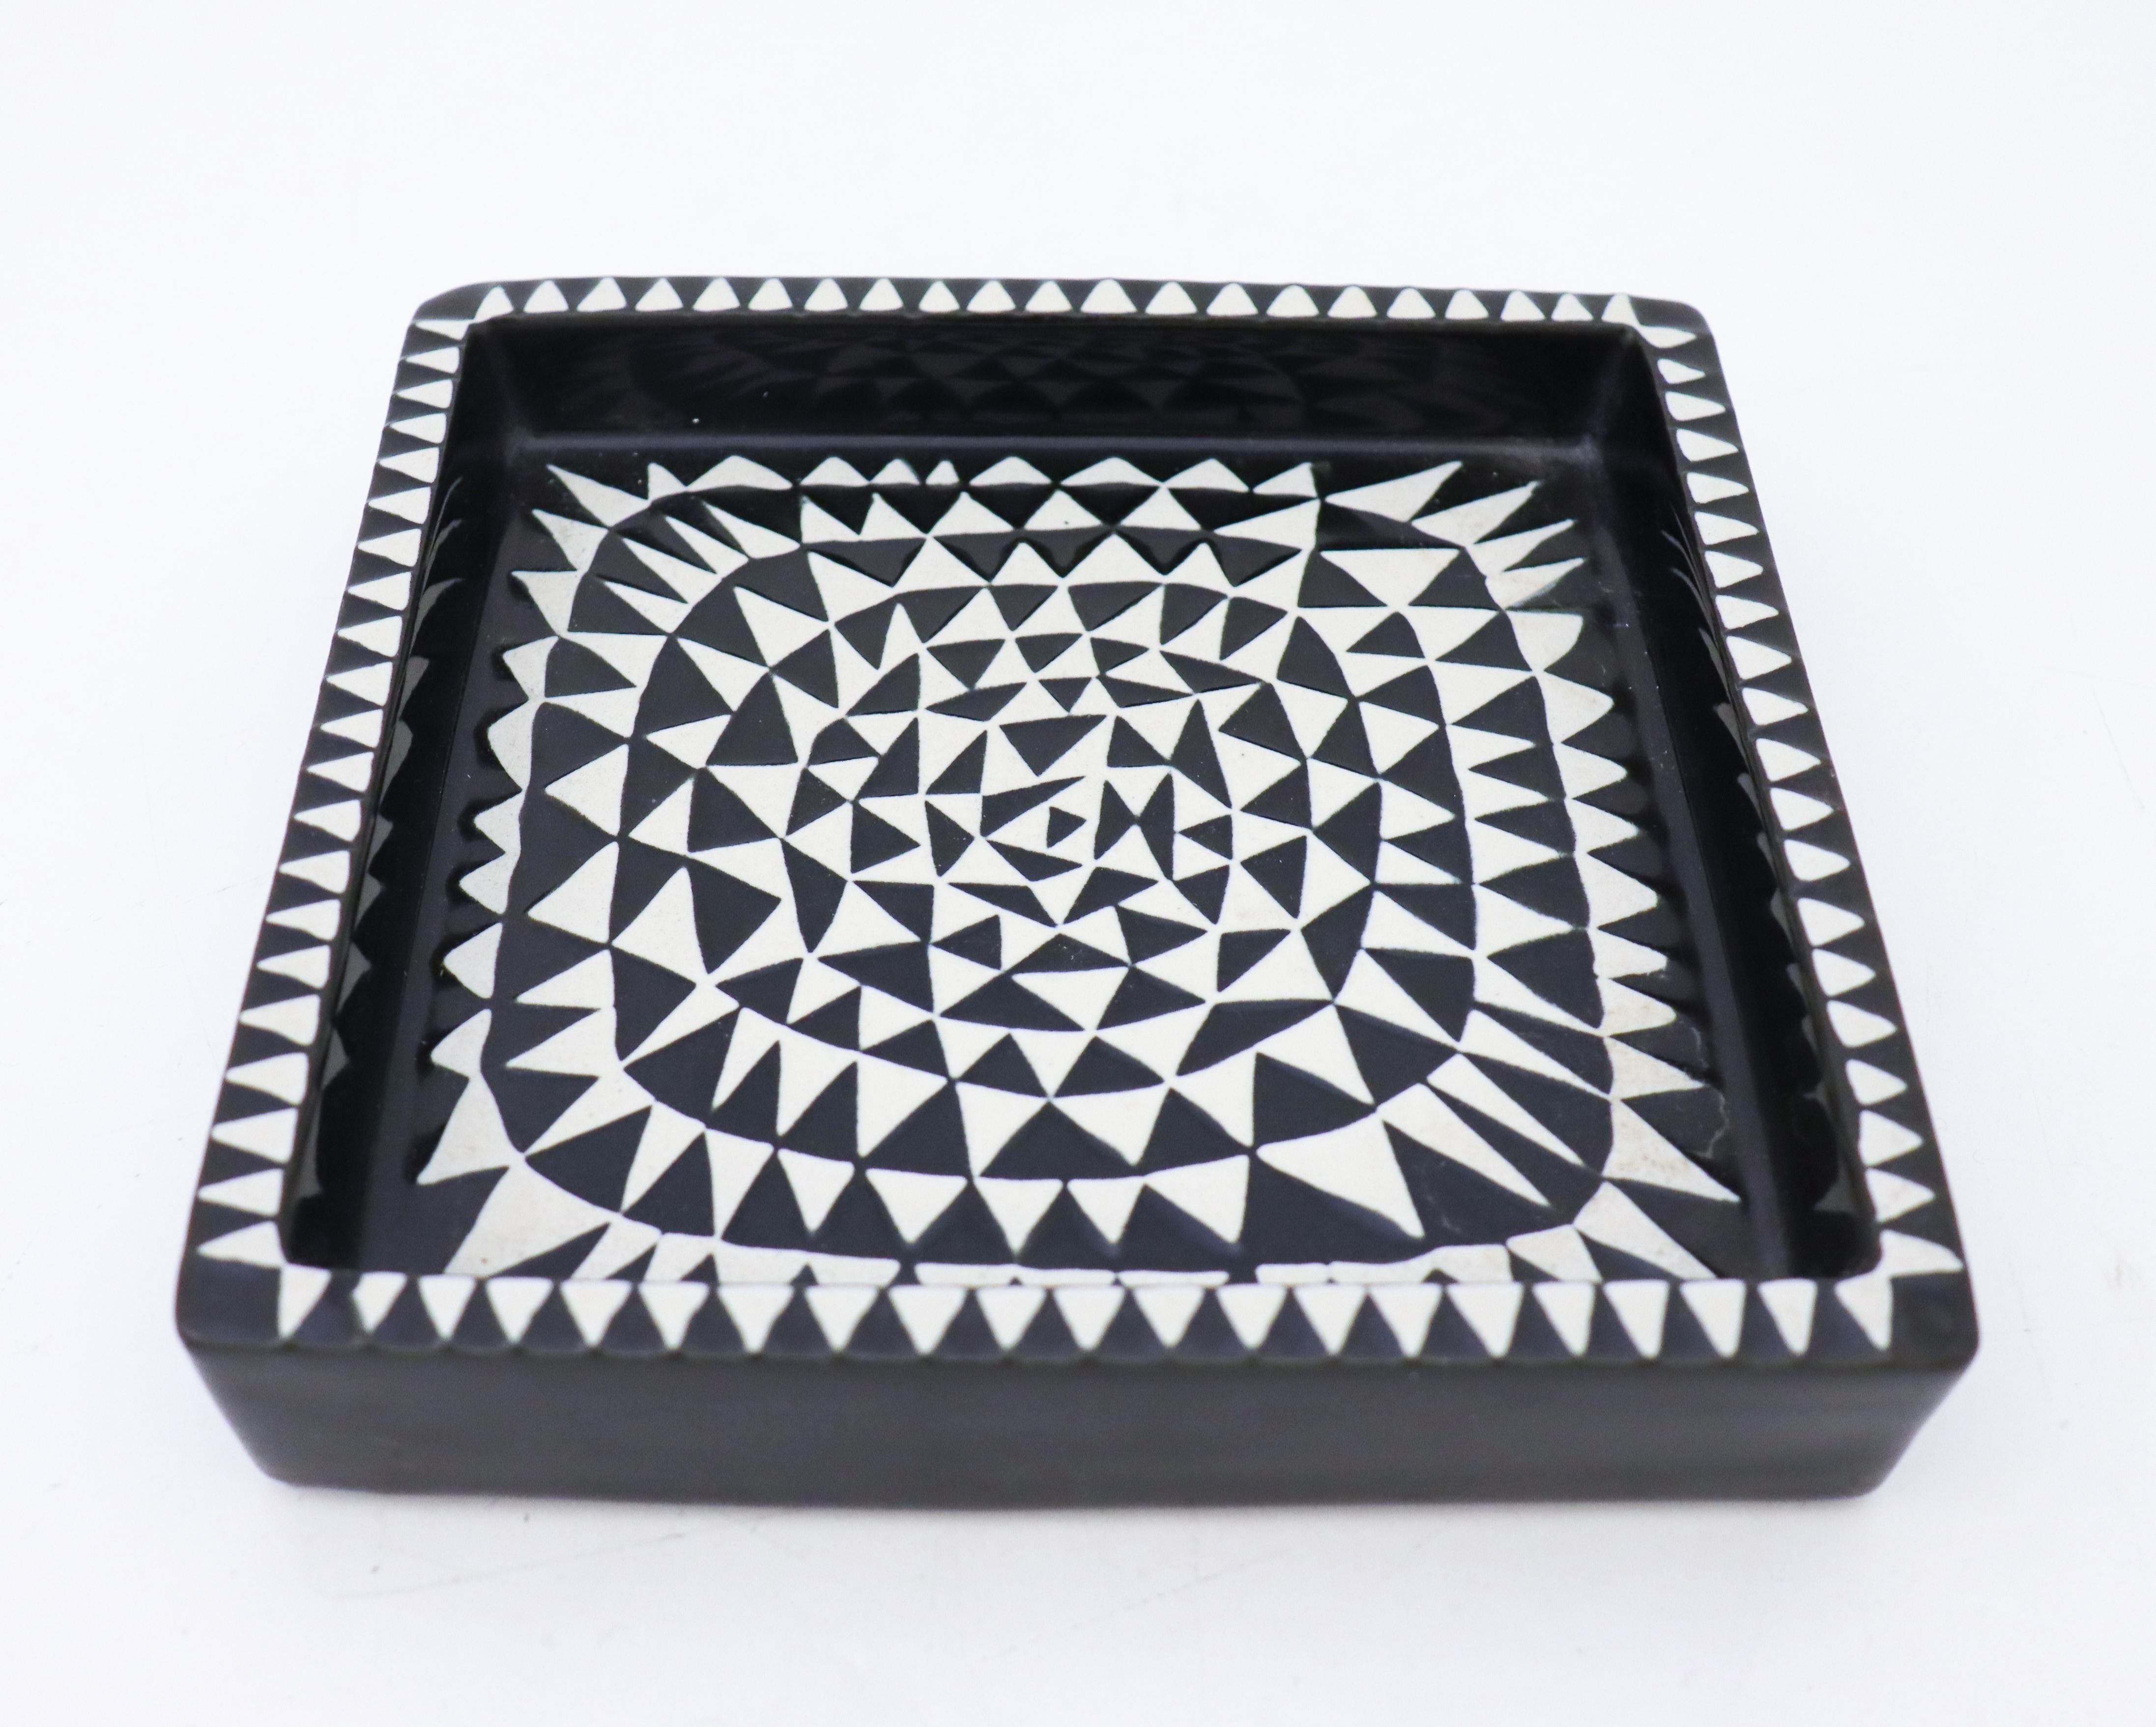 A lovely serving dish of model Domino designed by Stig Lindberg at Gustavsberg. It is 20 x 20 cm and in excellent condition. It is marked below with the Gustavsberg stamp. 

The Domino serie was created by Stig Lindberg in 1954 to the large